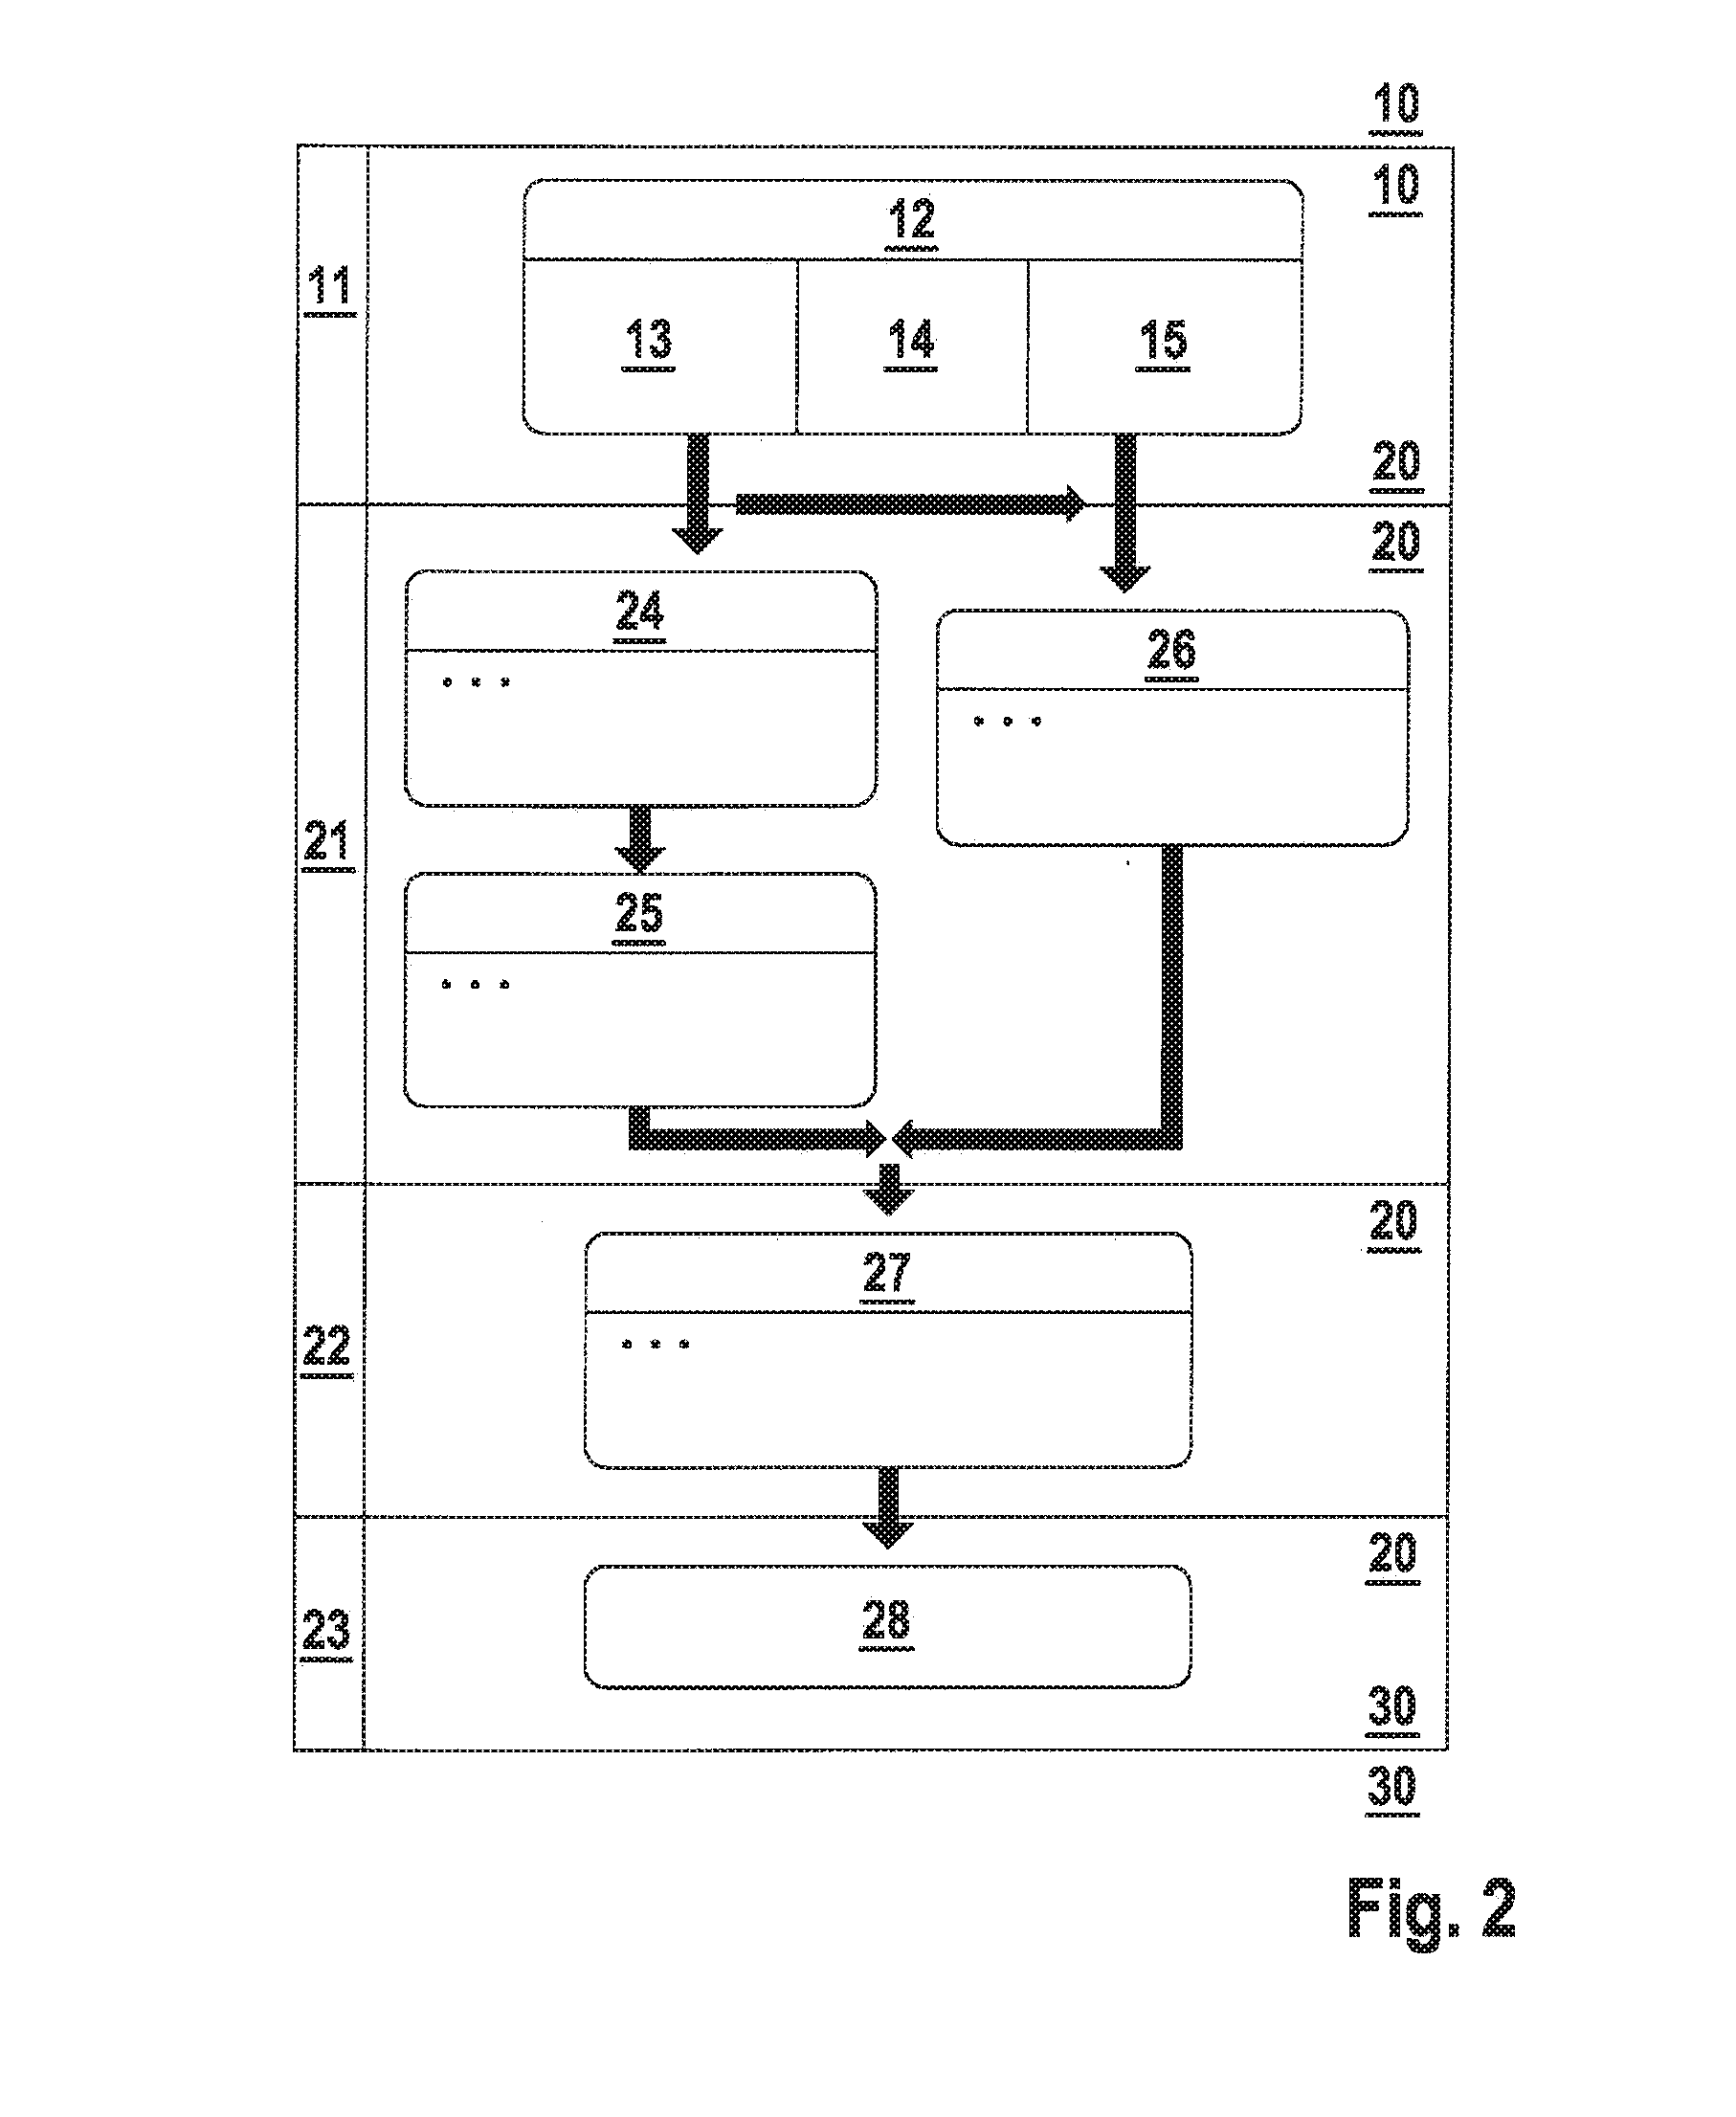 Method for ascertaining a degree of awareness of a vehicle operator